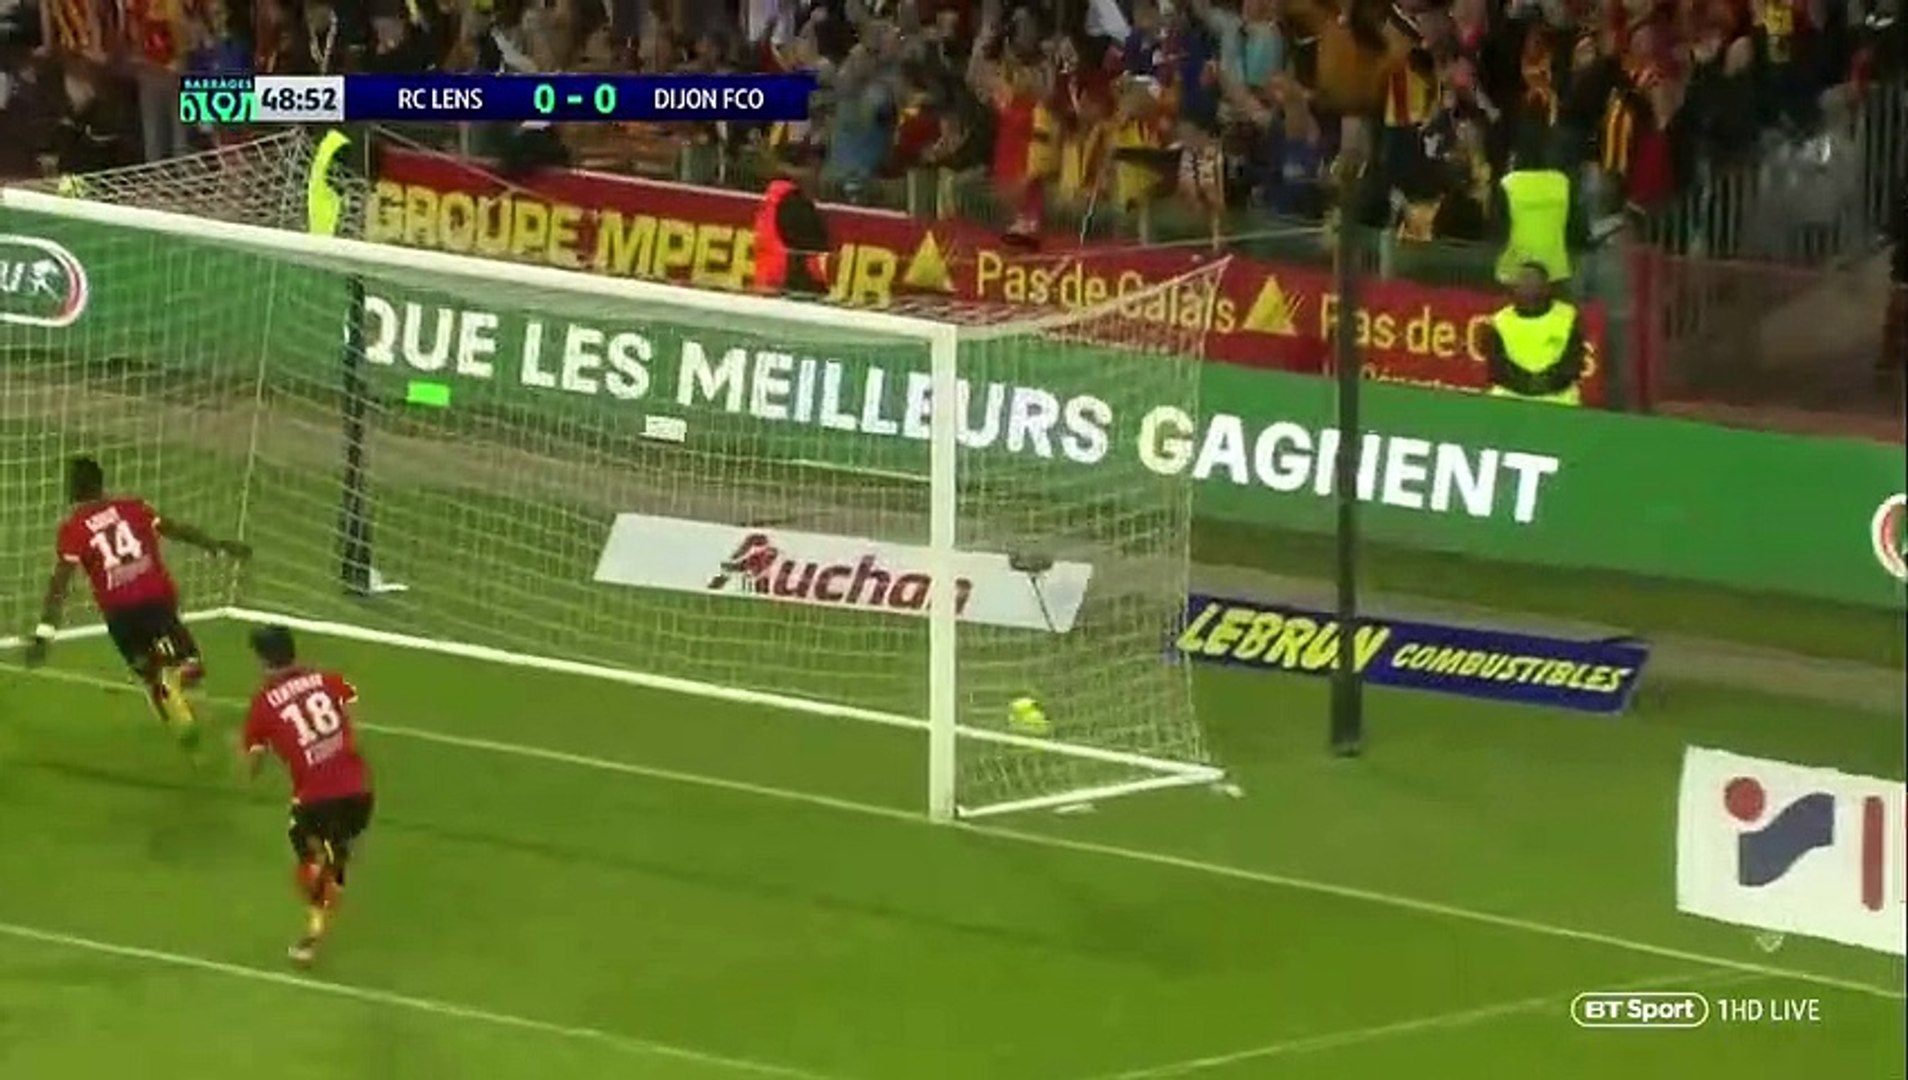 Lens vs Dijon | All Goals and Highlights - video Dailymotion